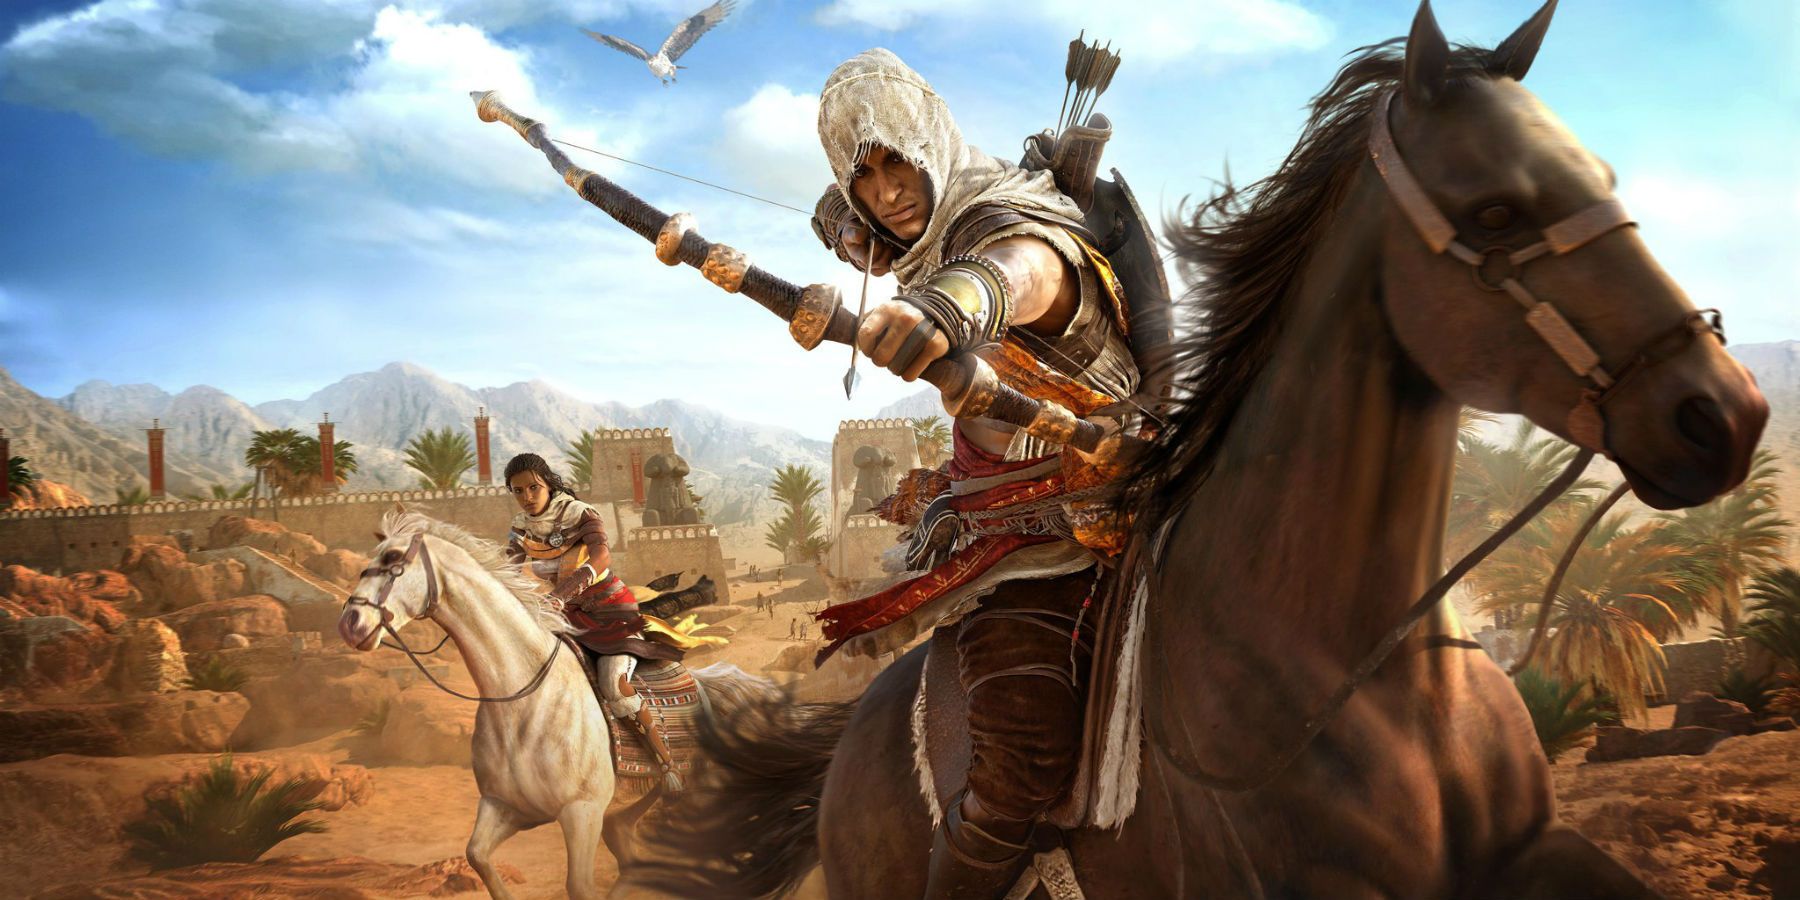 Assassins Creed Origins protagonist Bayek aiming his bow while horseback in the desert.